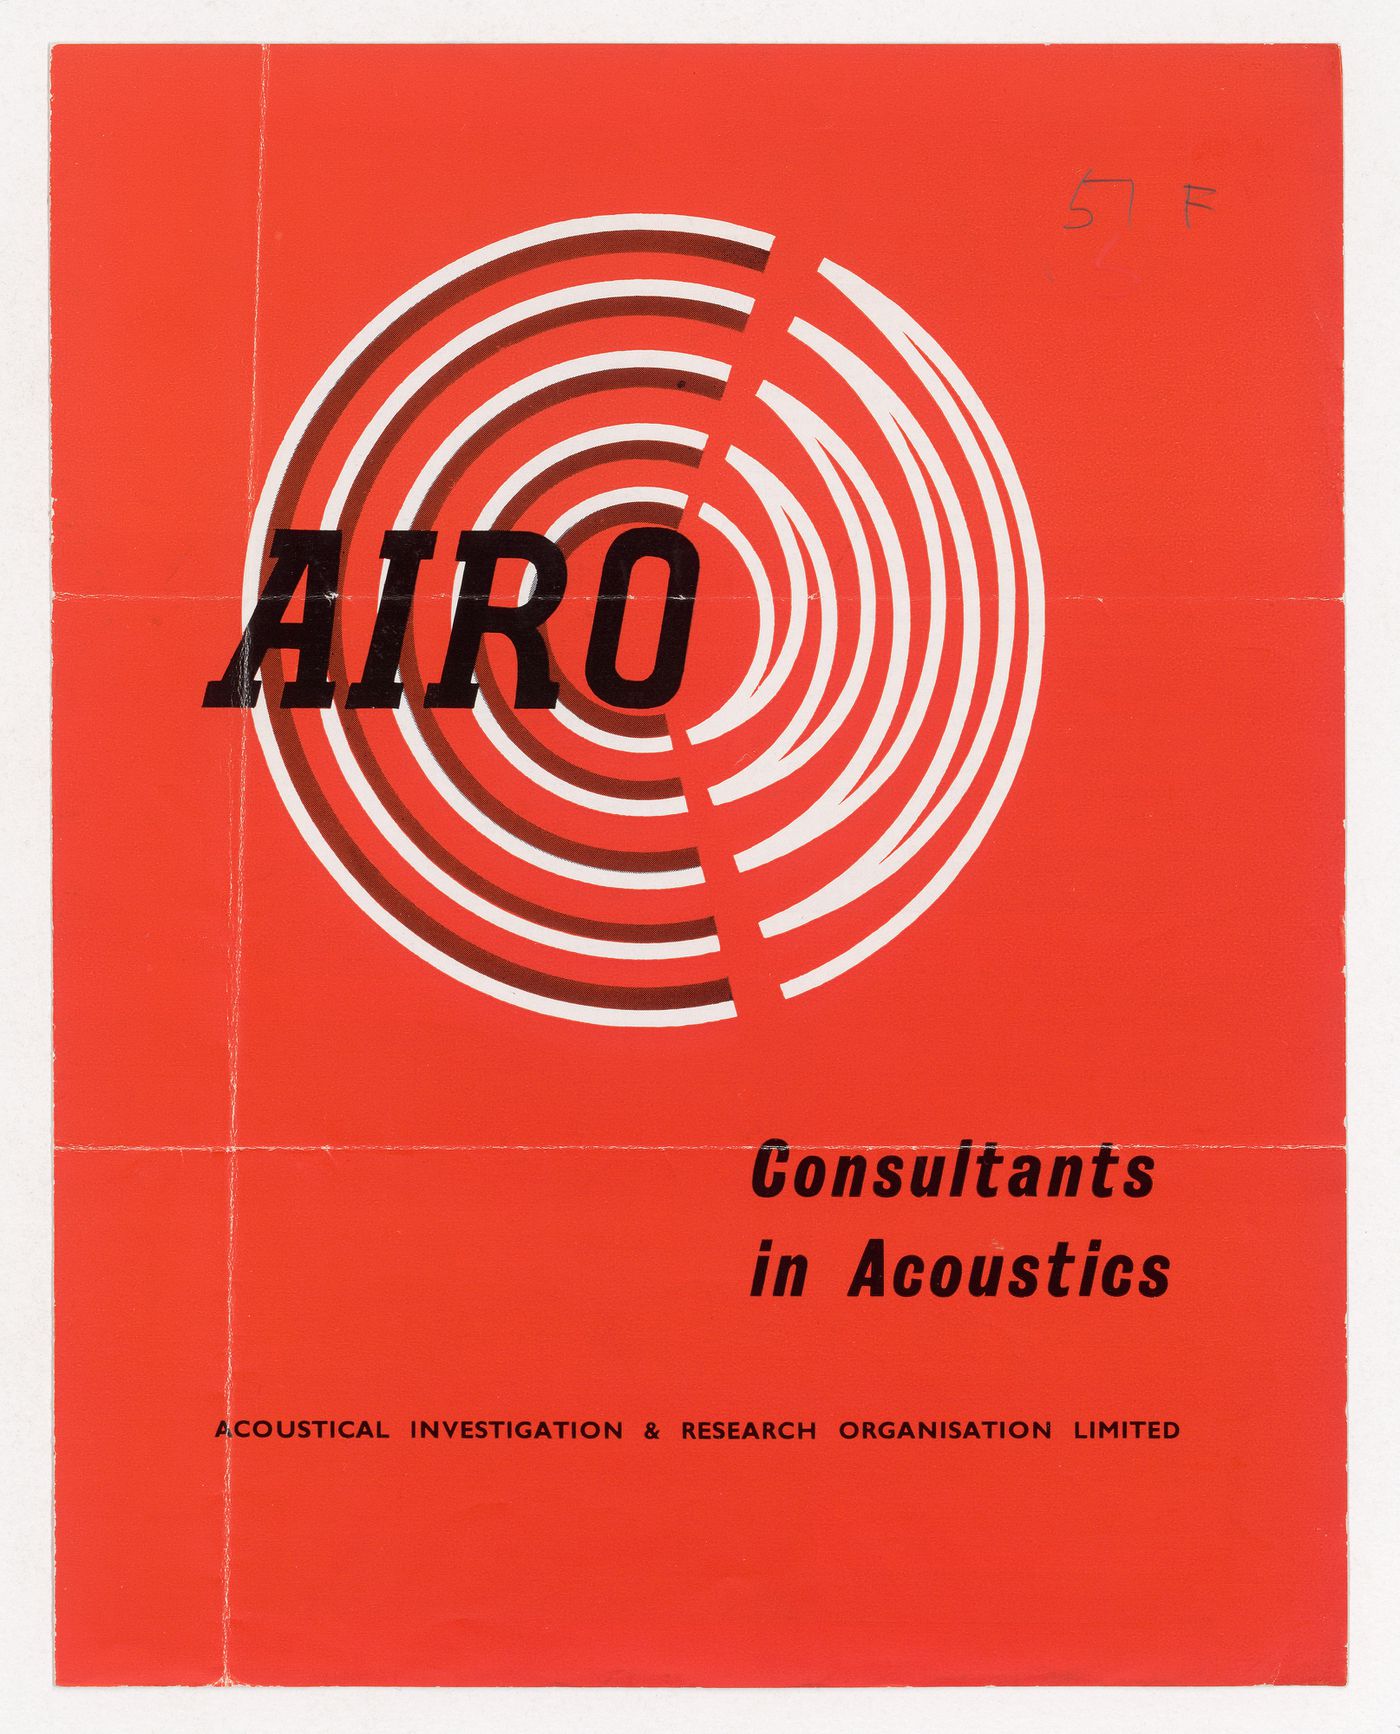 Brochure about  AIRO (Acoustical Investigation & Research Organization Limited)